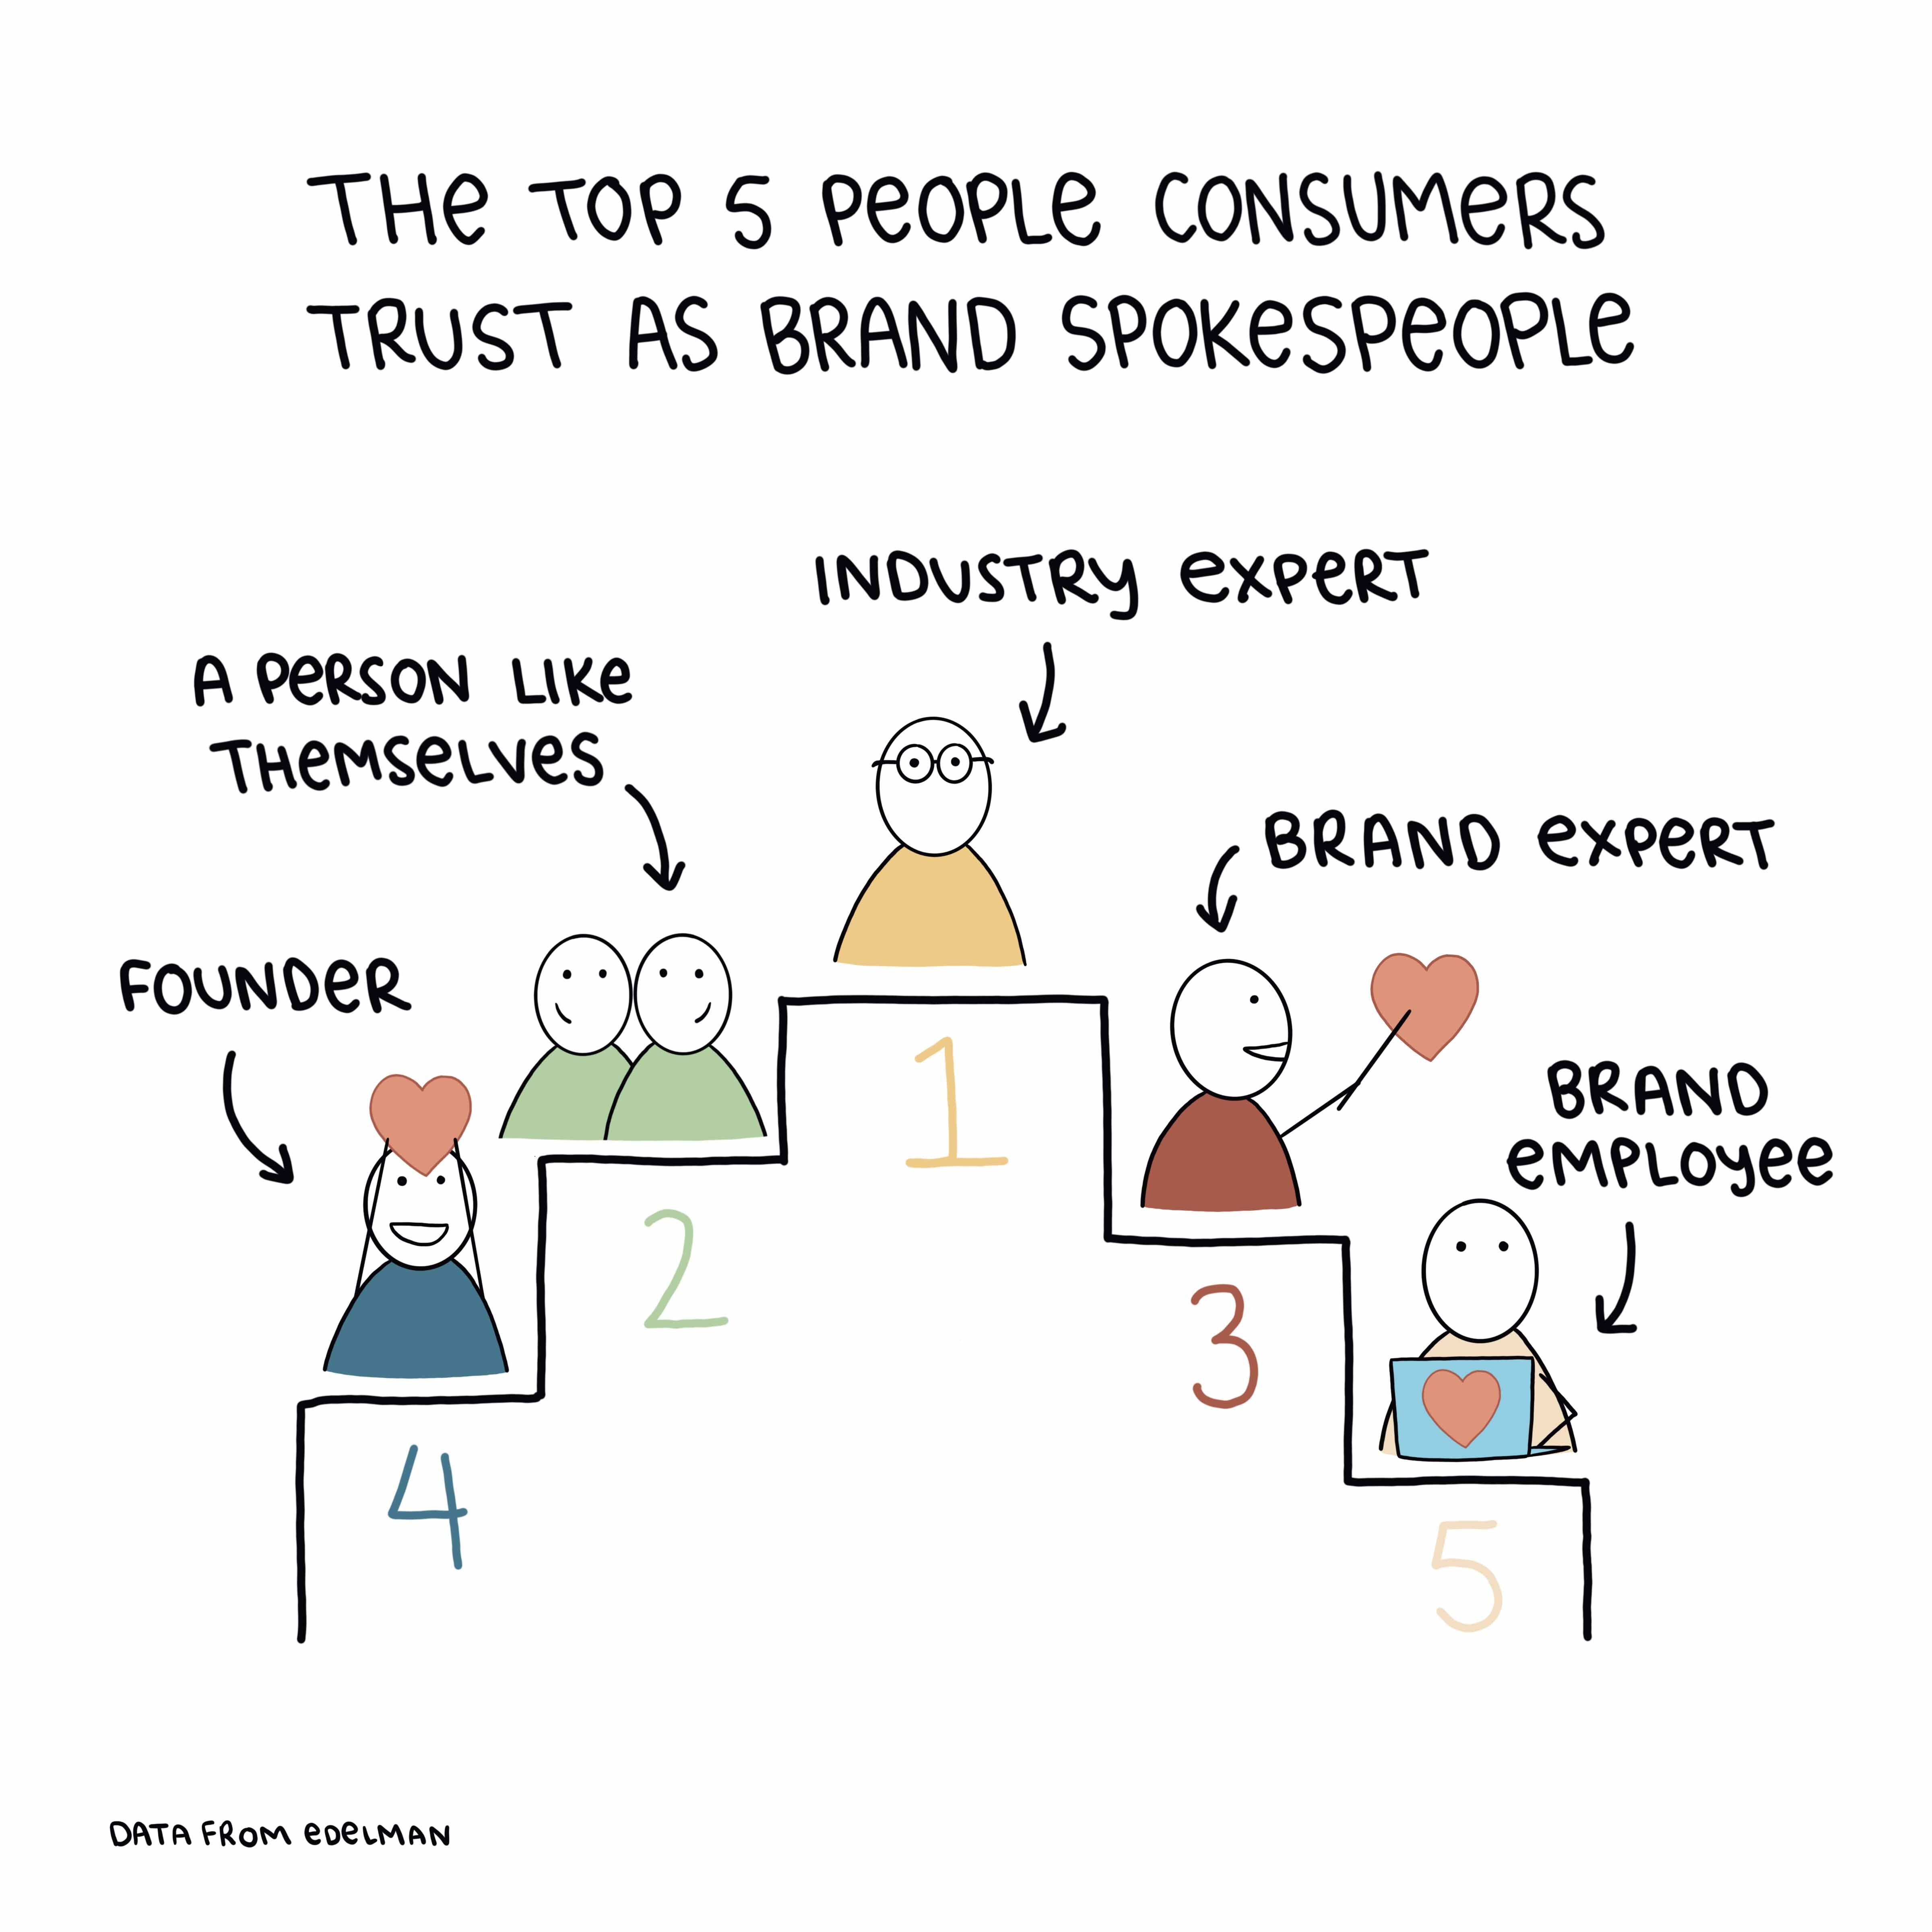 The top five brand spokespeople consumers trust